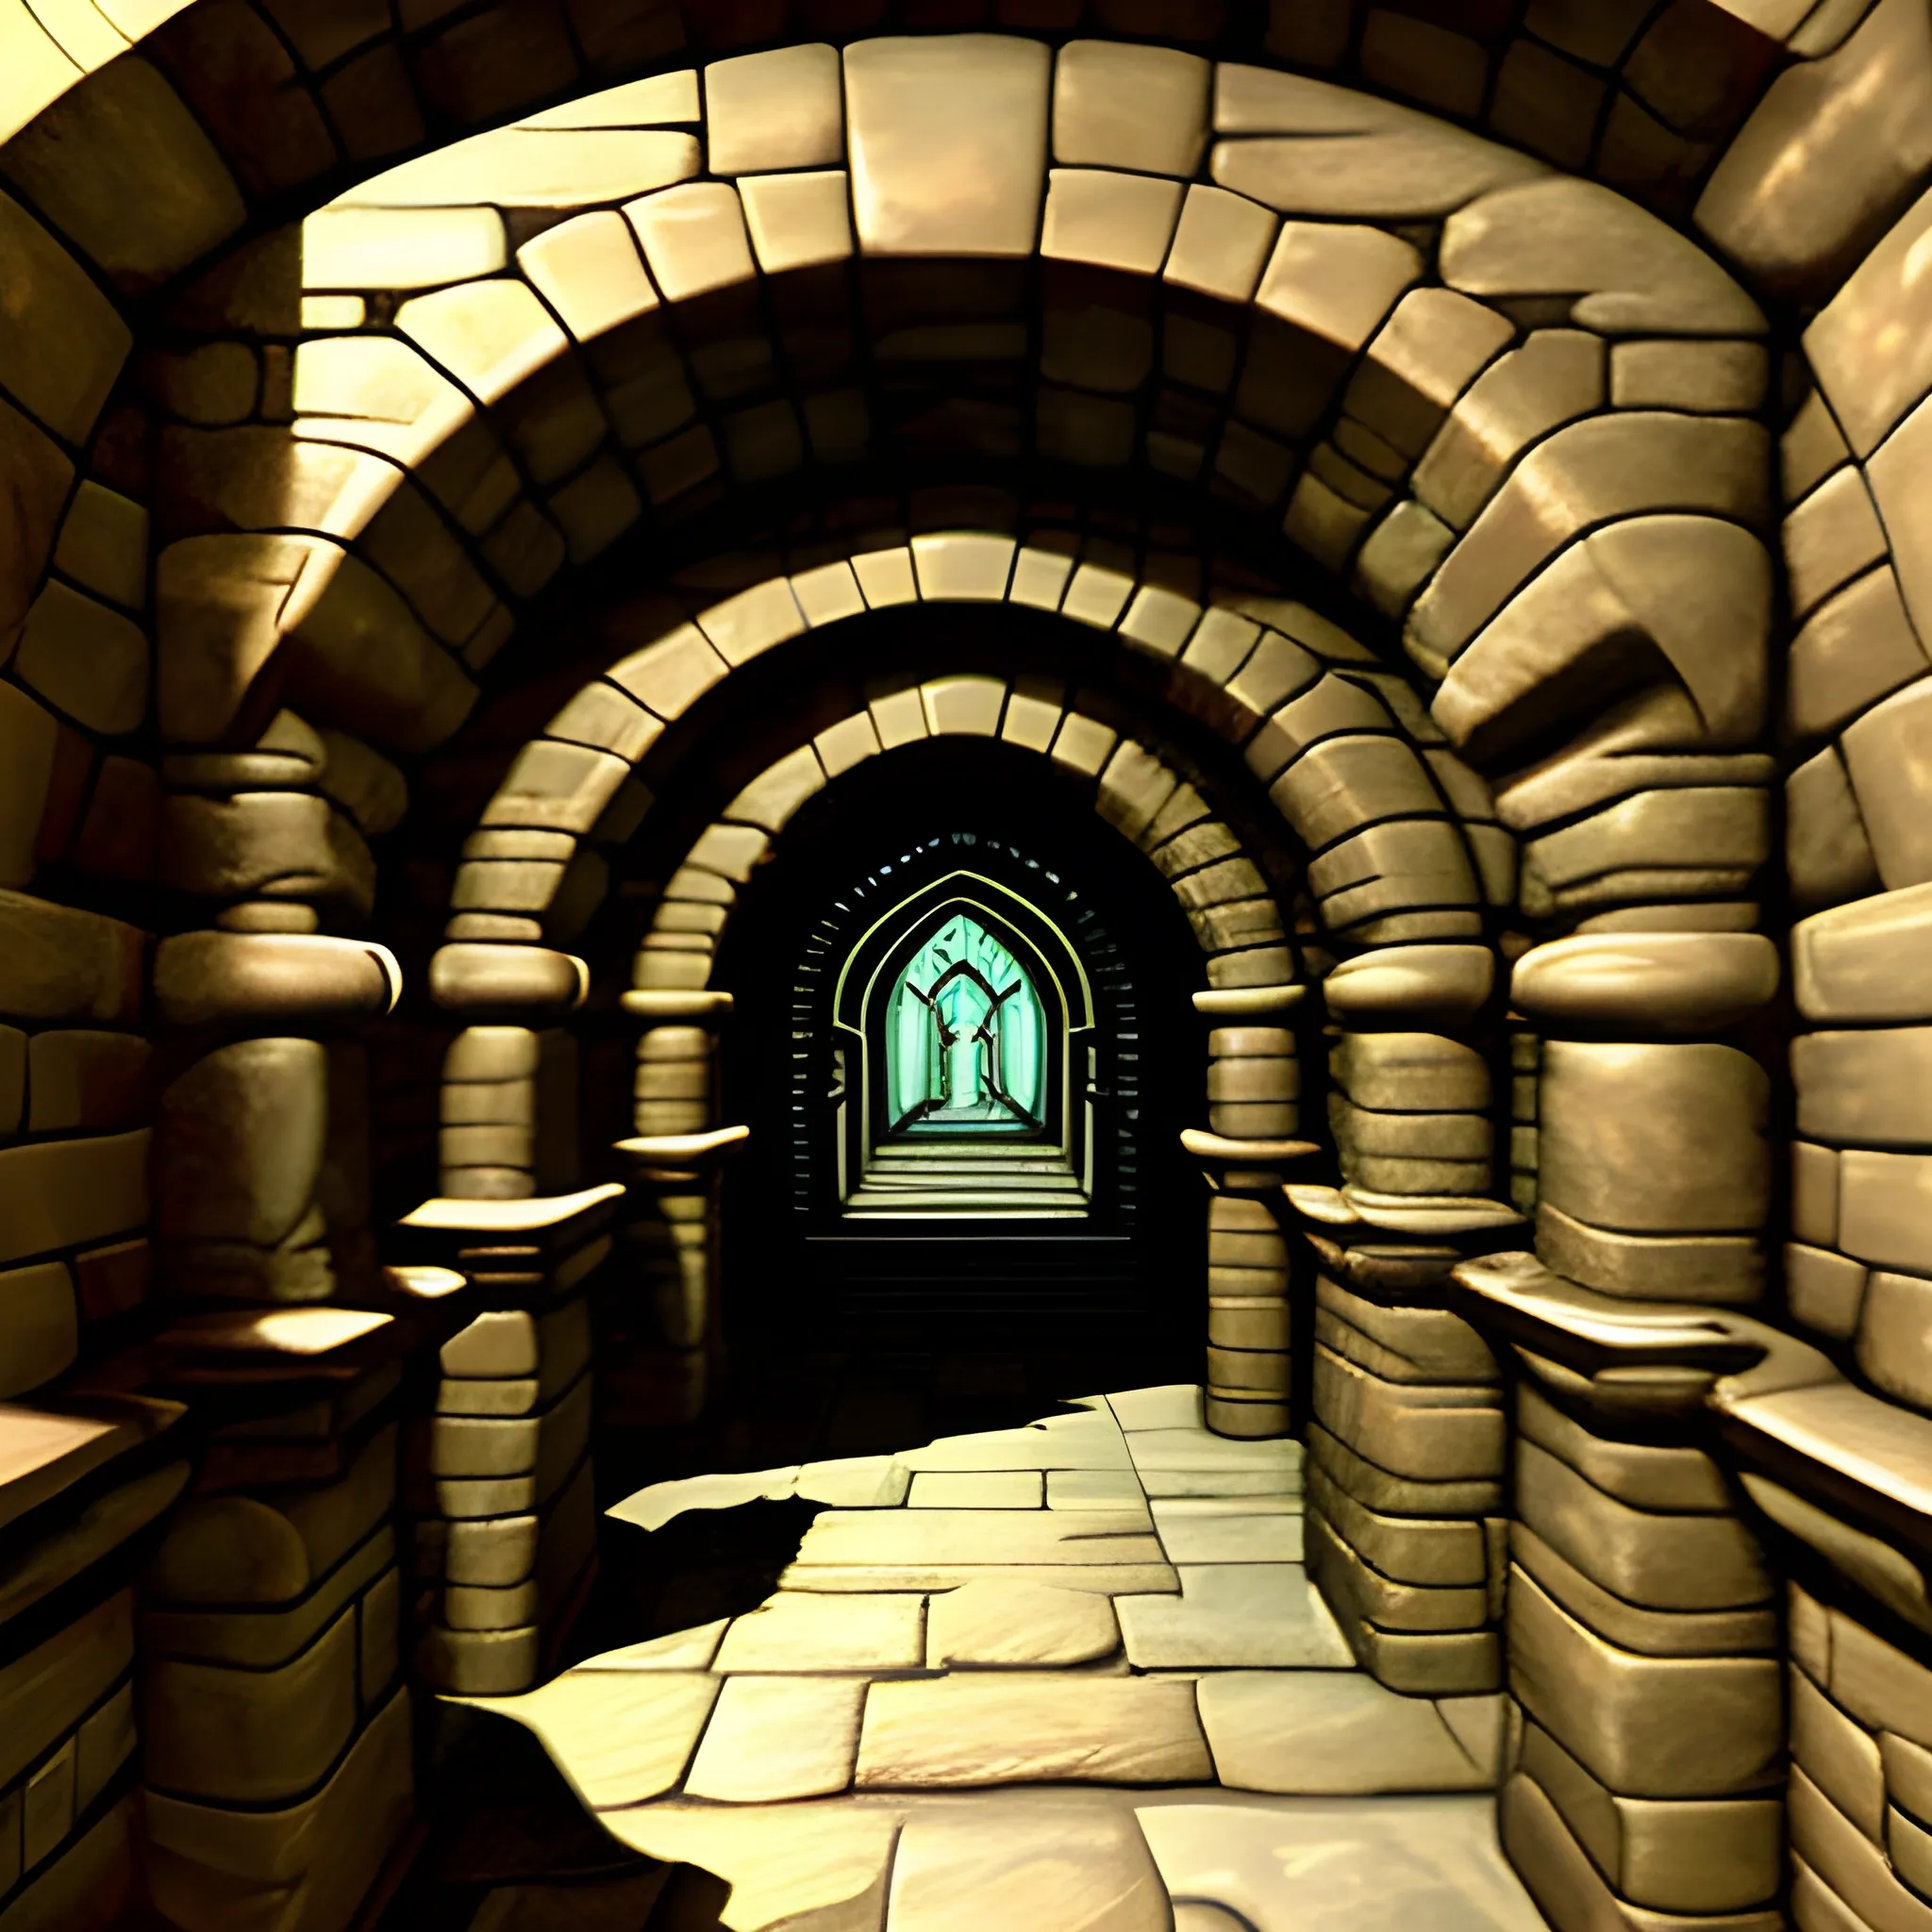  dnd style over-view map, tunnel descends gently toward 5-foot-high iron double
doors, Beyond stretches a vault about
15 feet wide and 60 feet long. Several shallow troughs
are carved into each of the long walls like inset shelves
and a single standing trough runs down the center of
the room, Each trough is filled with coins, oil painting style
